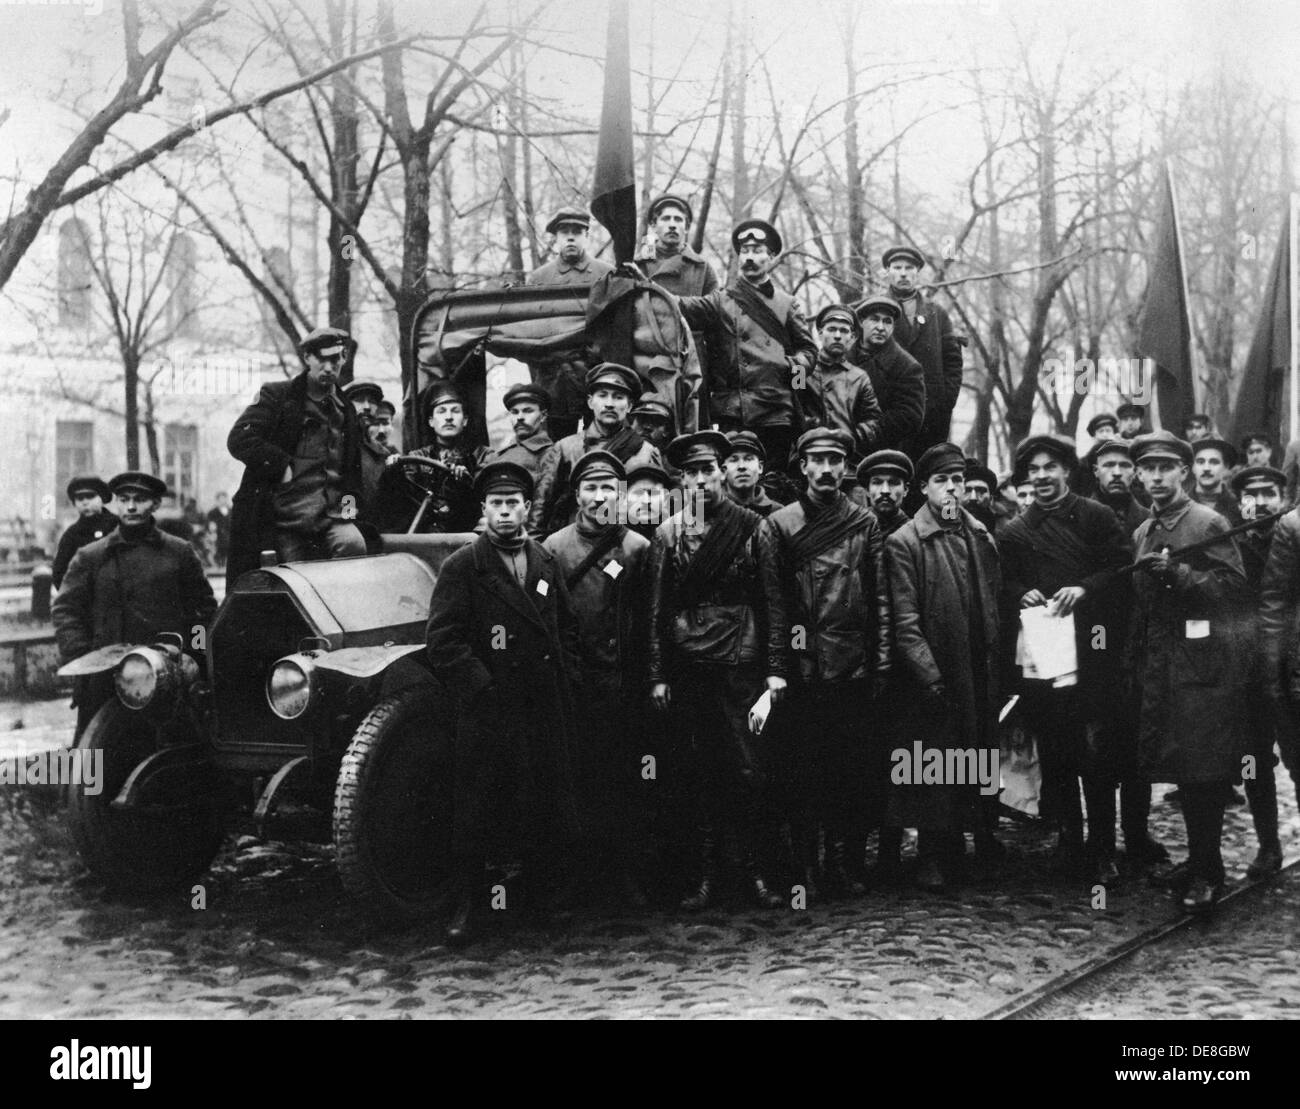 A Group of Red Army Men. Petrograd, 1917. Stock Photo